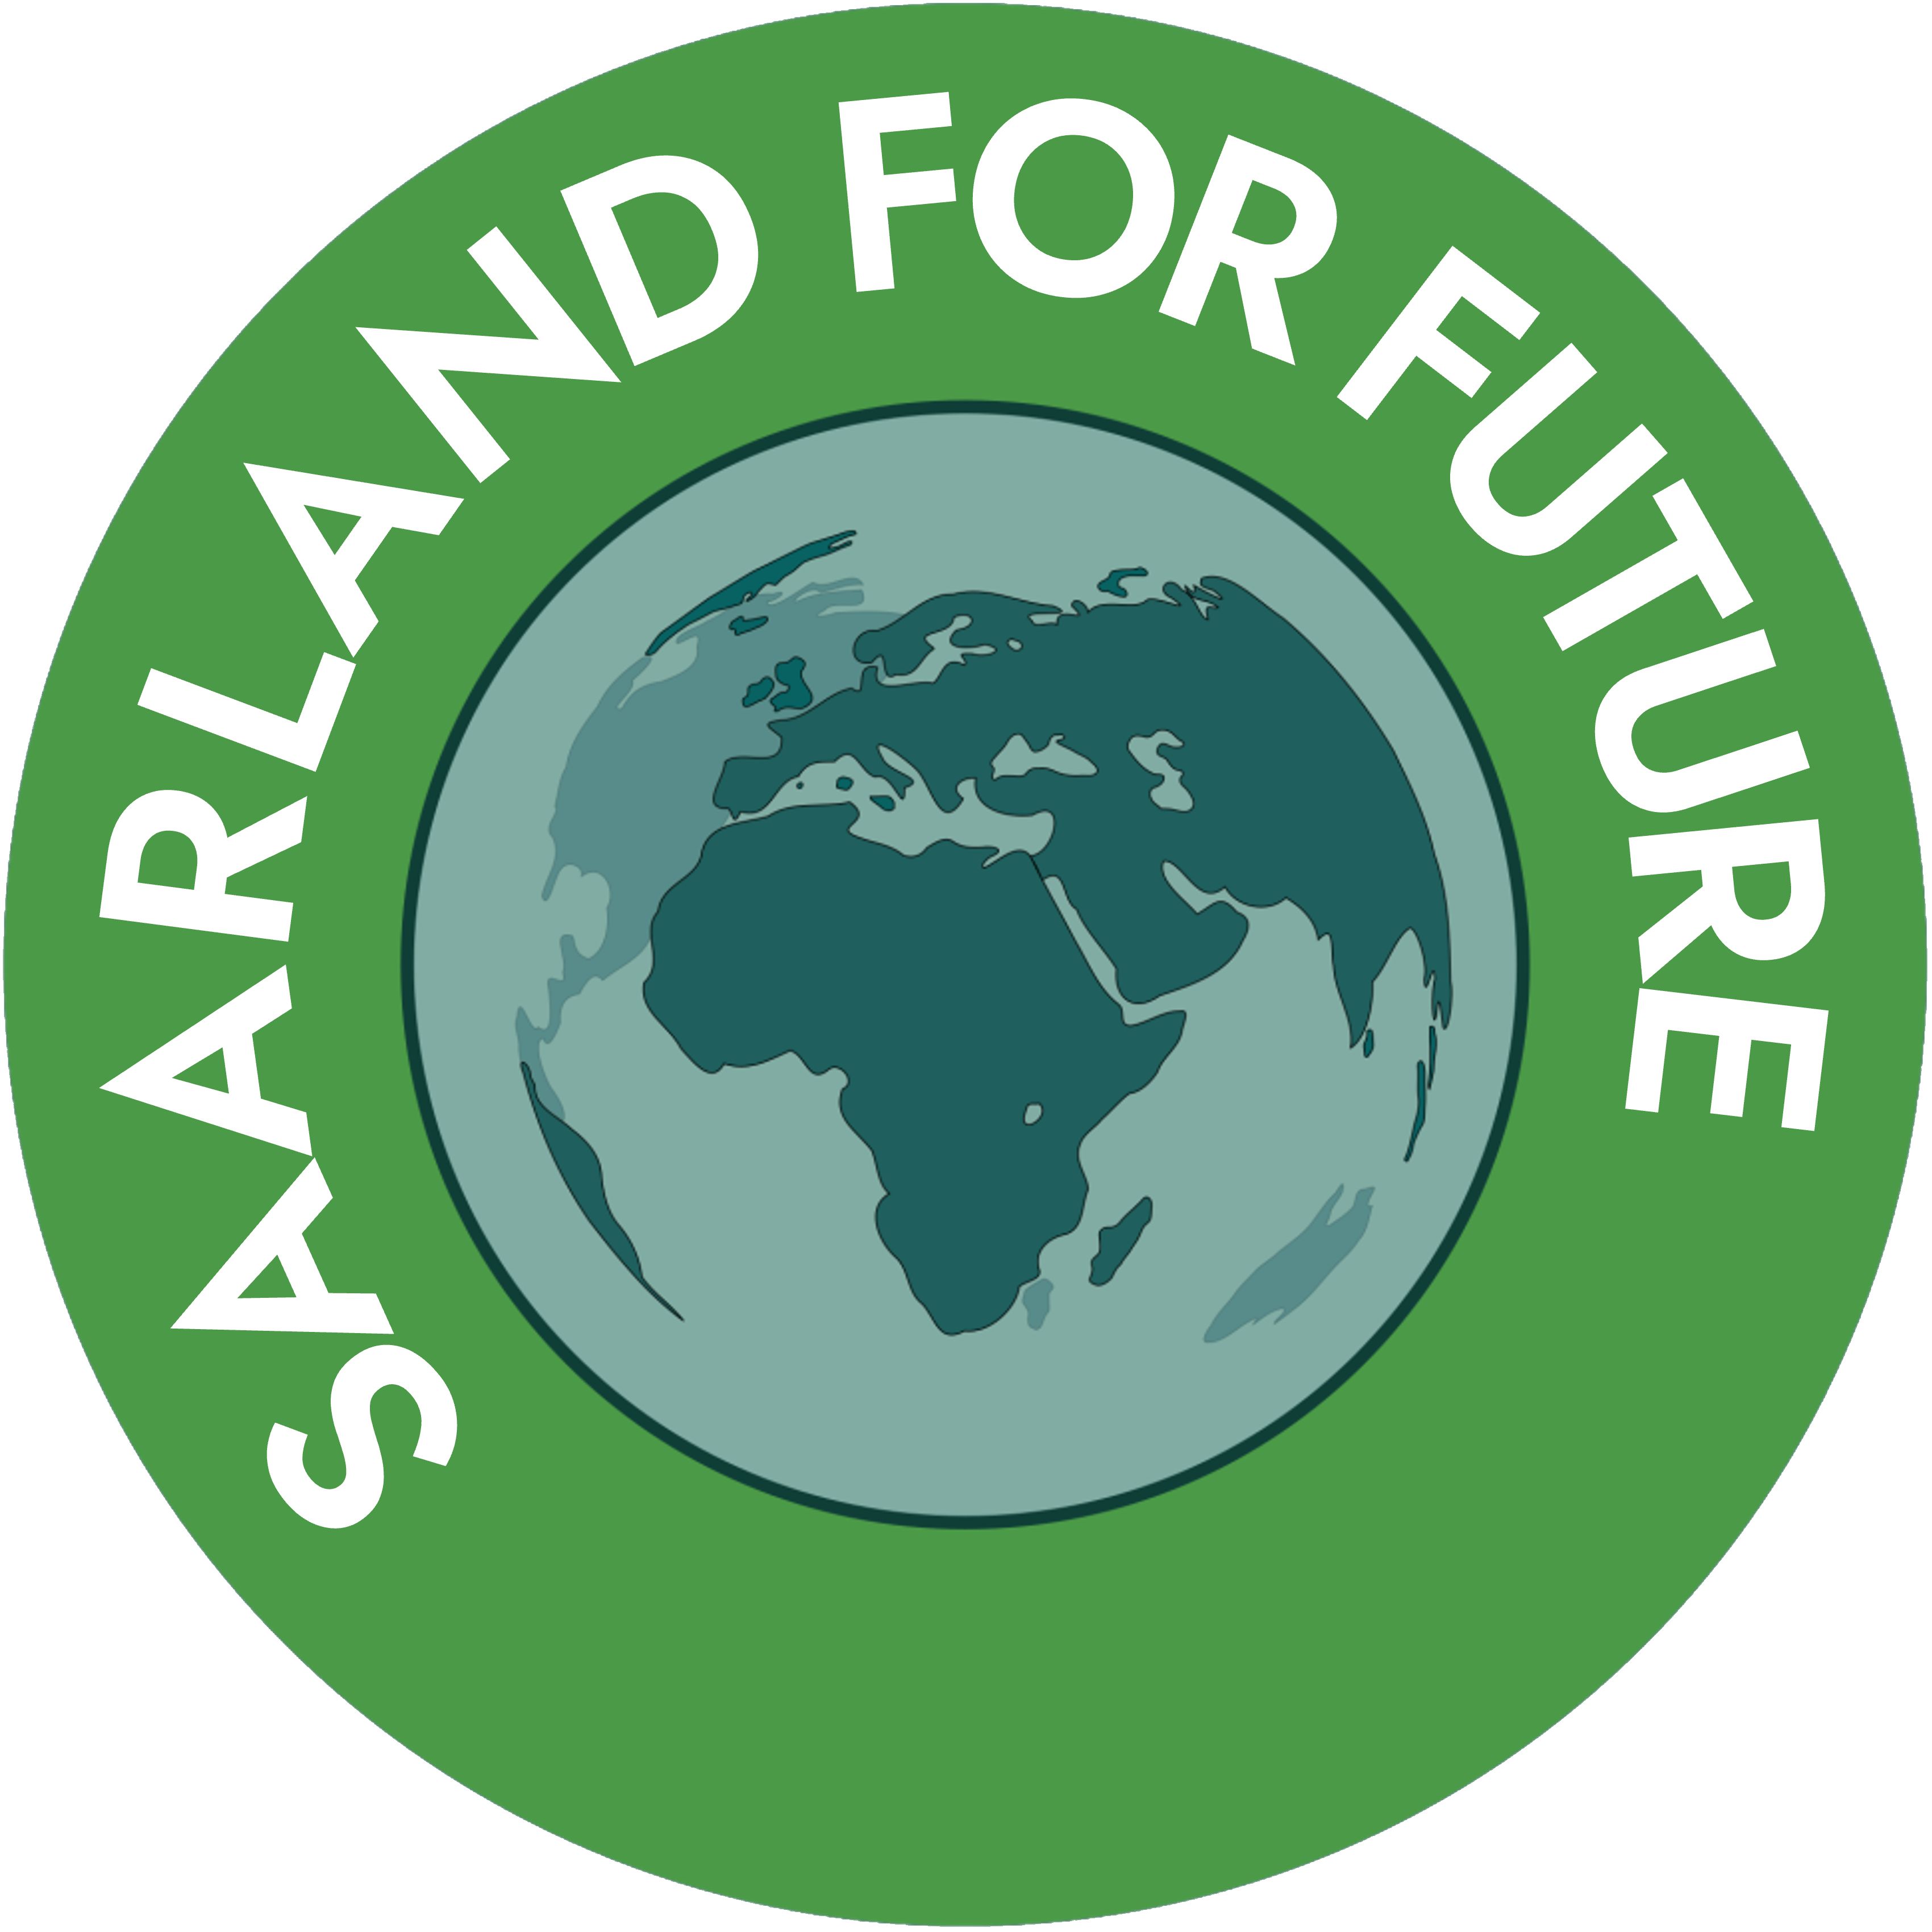 Saarland for Future